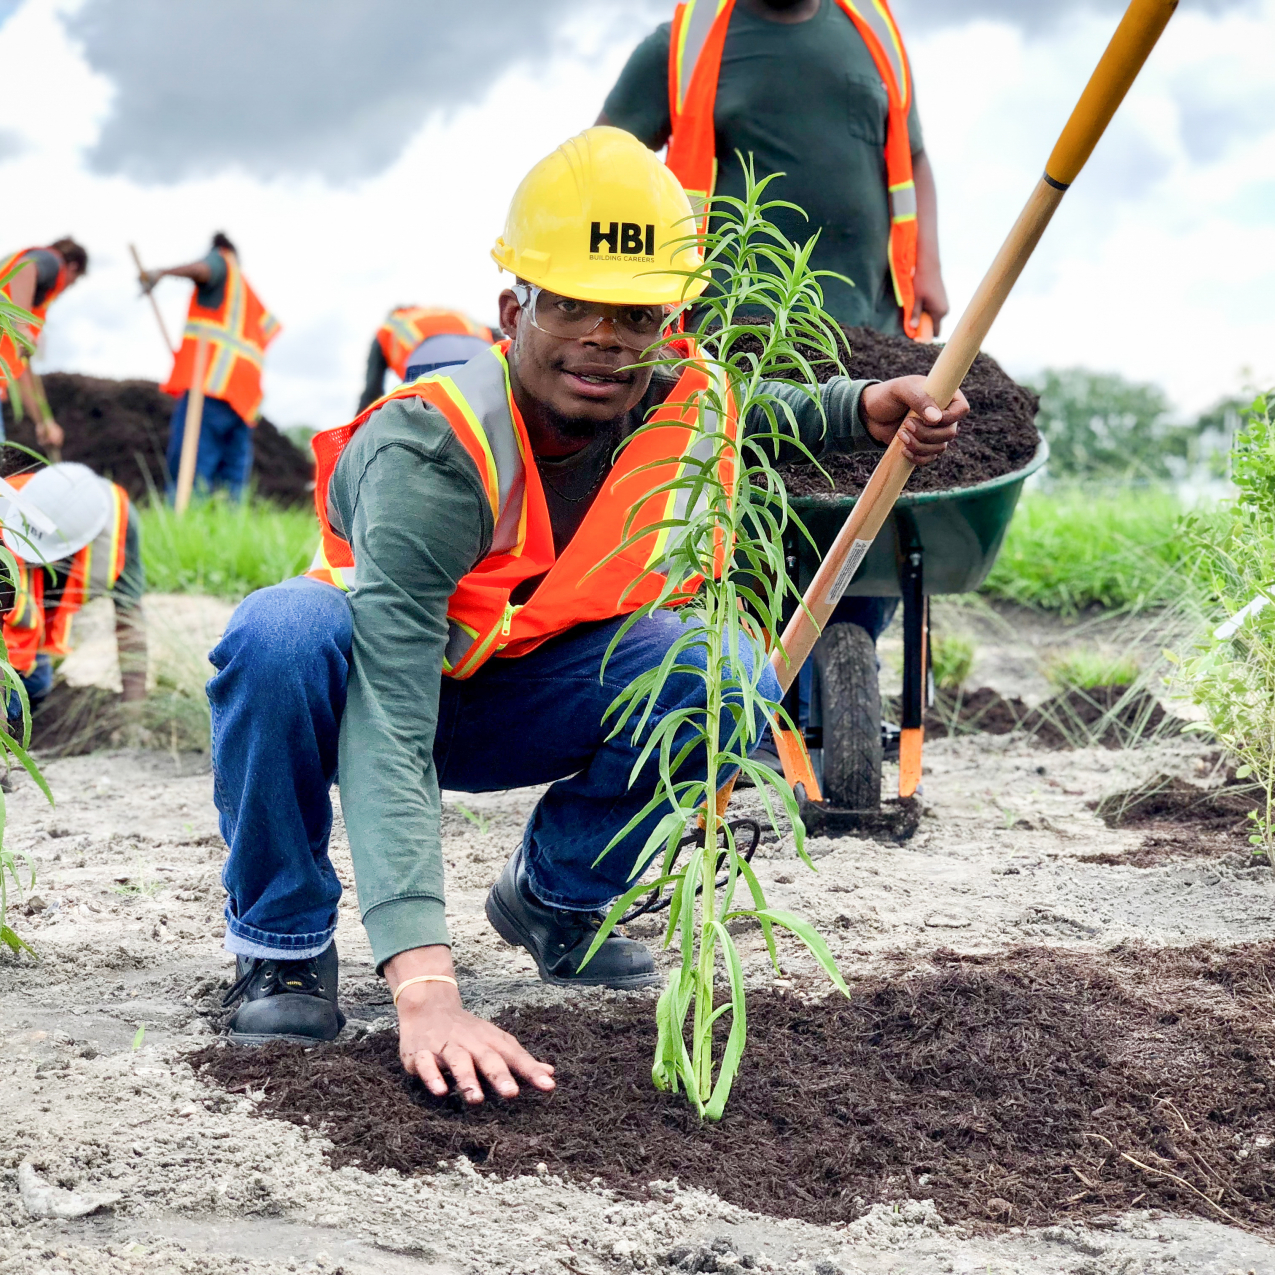 A person wearing a hardhat and safety vest kneels down to pack soil around a tall, green plant. Others in the background carry mulch from a wheelbarrow and large pile with shovels.